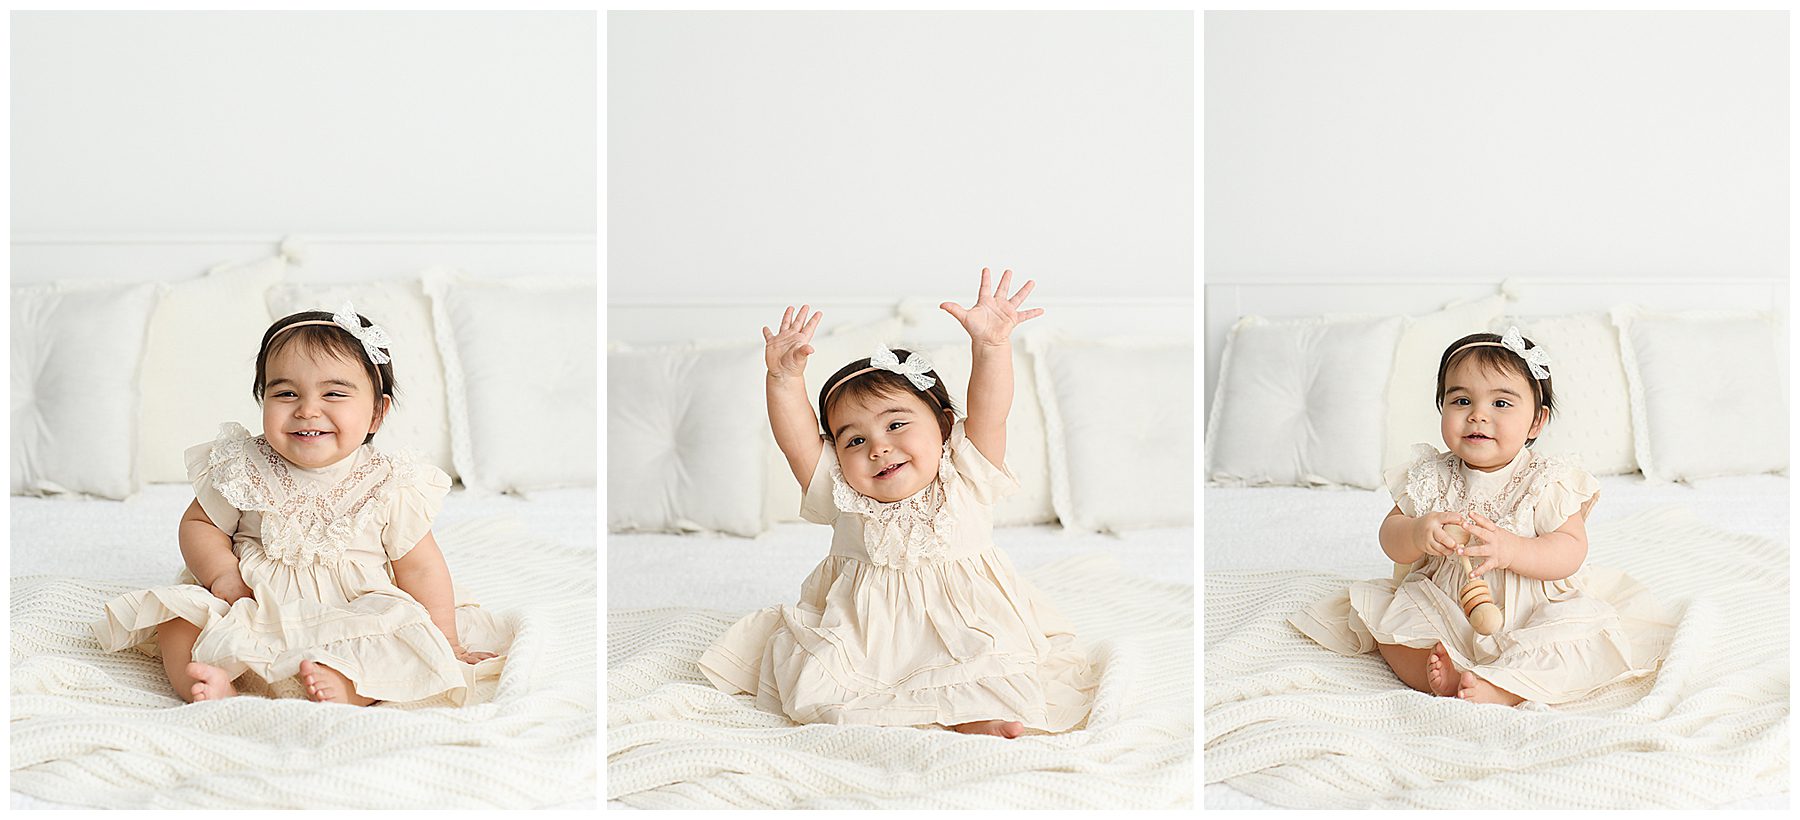 Studio session for one year old baby in white dress on bed